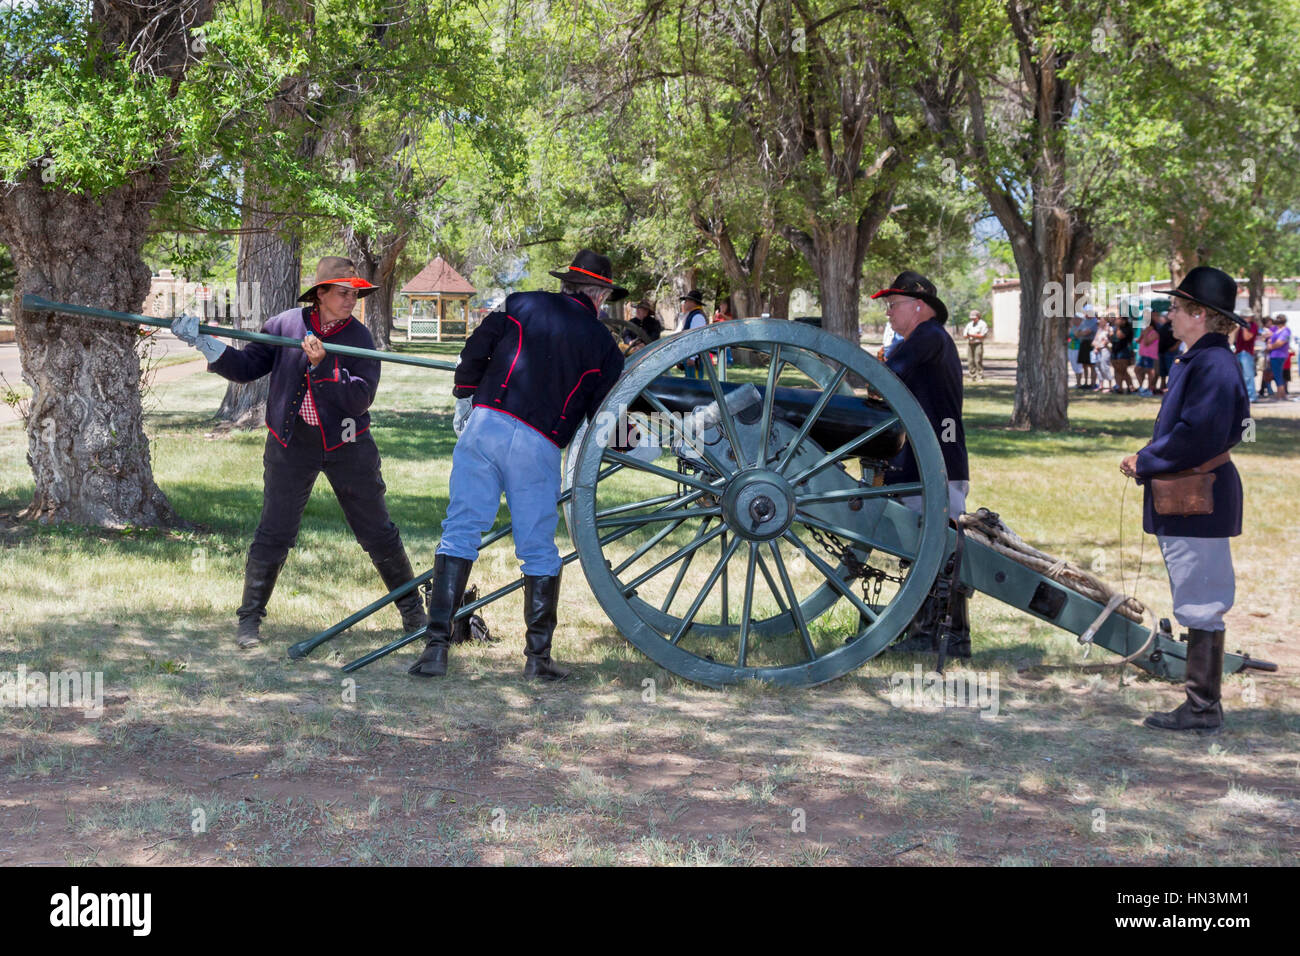 Fort Stanton, New Mexico - 'Fort Stanton Live!,' an annual living history program. Fort Stanton was built in 1855 during the Indian wars. Stock Photo